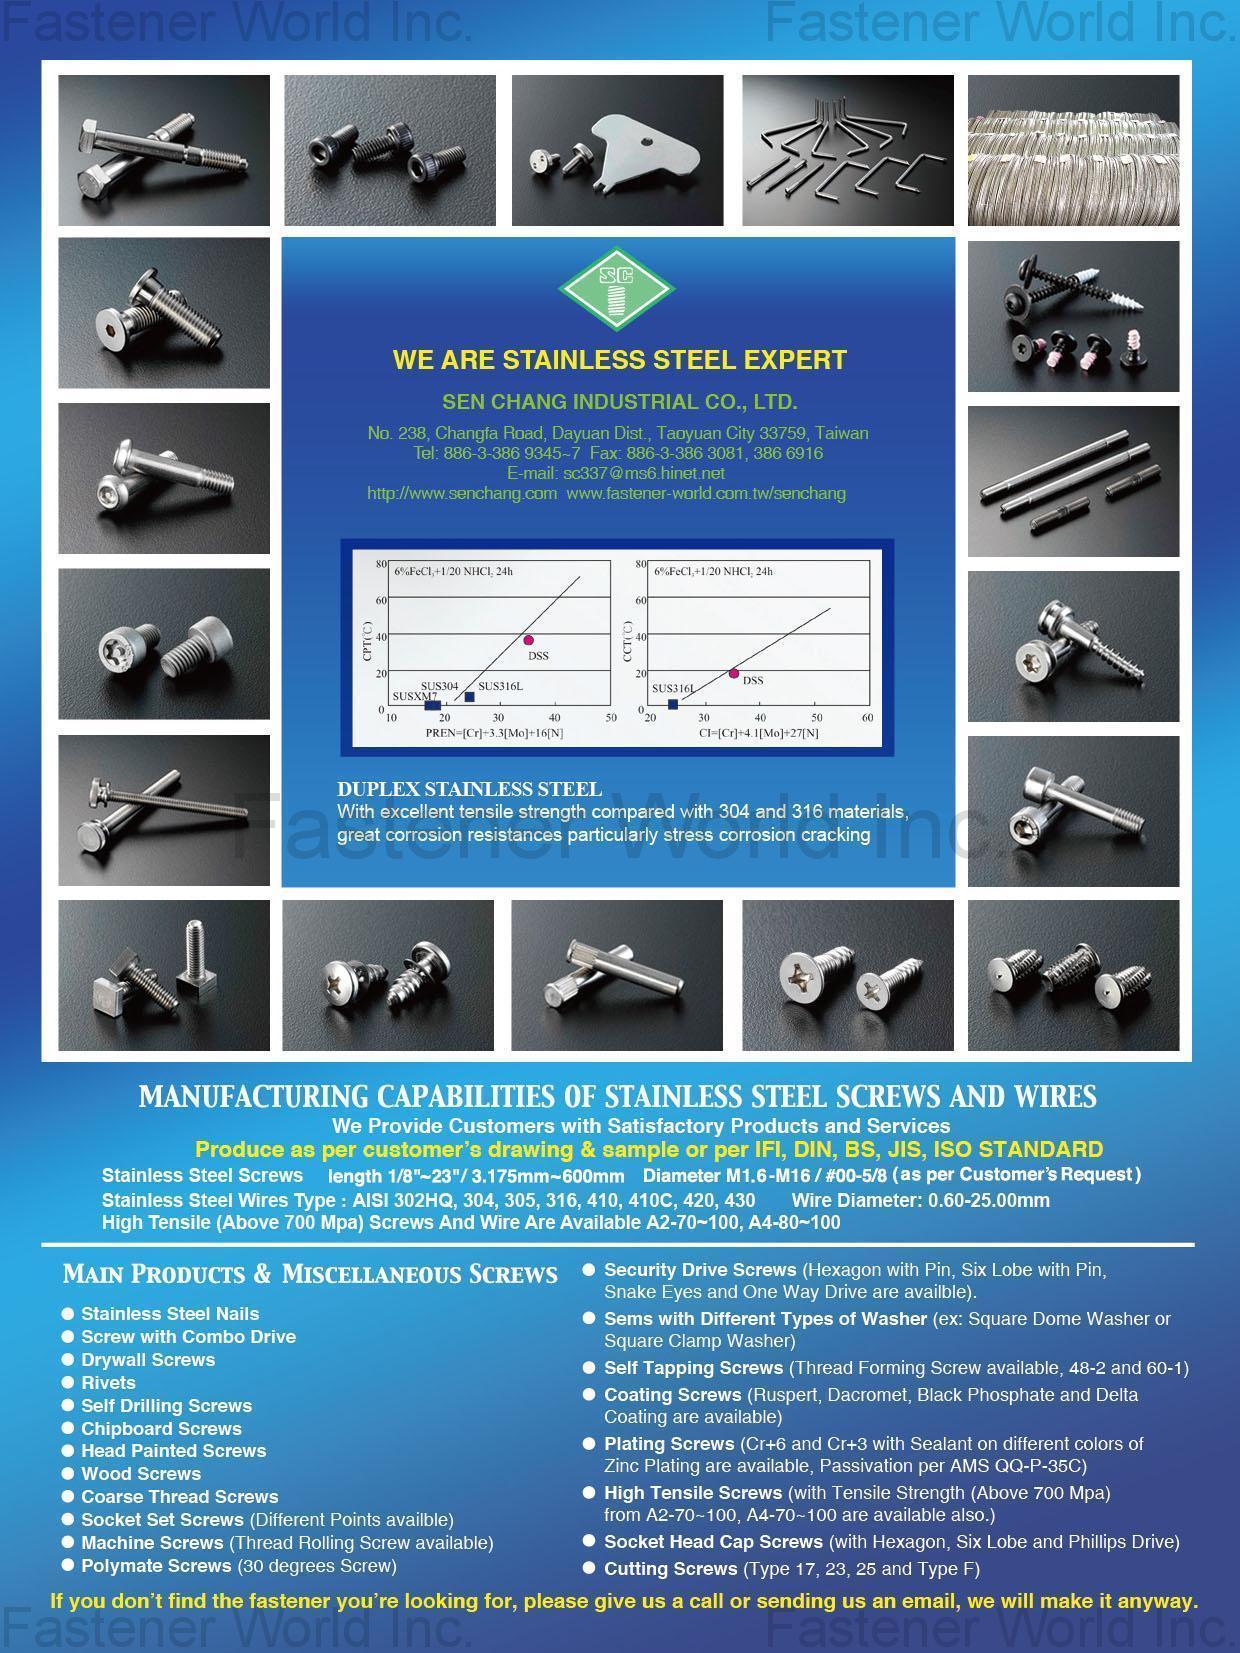 SEN CHANG INDUSTRIAL CO., LTD.  , Stainless Steel Nails, Screw with Combo Drive, Drywall Screws, Rivets, Self Drilling Screws, Chipboard Screws, Head Painted Screws, Wood Screws, Coarse Thread Screws, Socket Set Screws, machine Screws, Polymate Screws, Security Drive Screws, Sems with Different Type of Washer, Self Tapping Screws, Coating Screws, Plating Screws, High Tensile Screws, Socket Head Cap Screws, Cutting Screws , Stainless Steel Screws